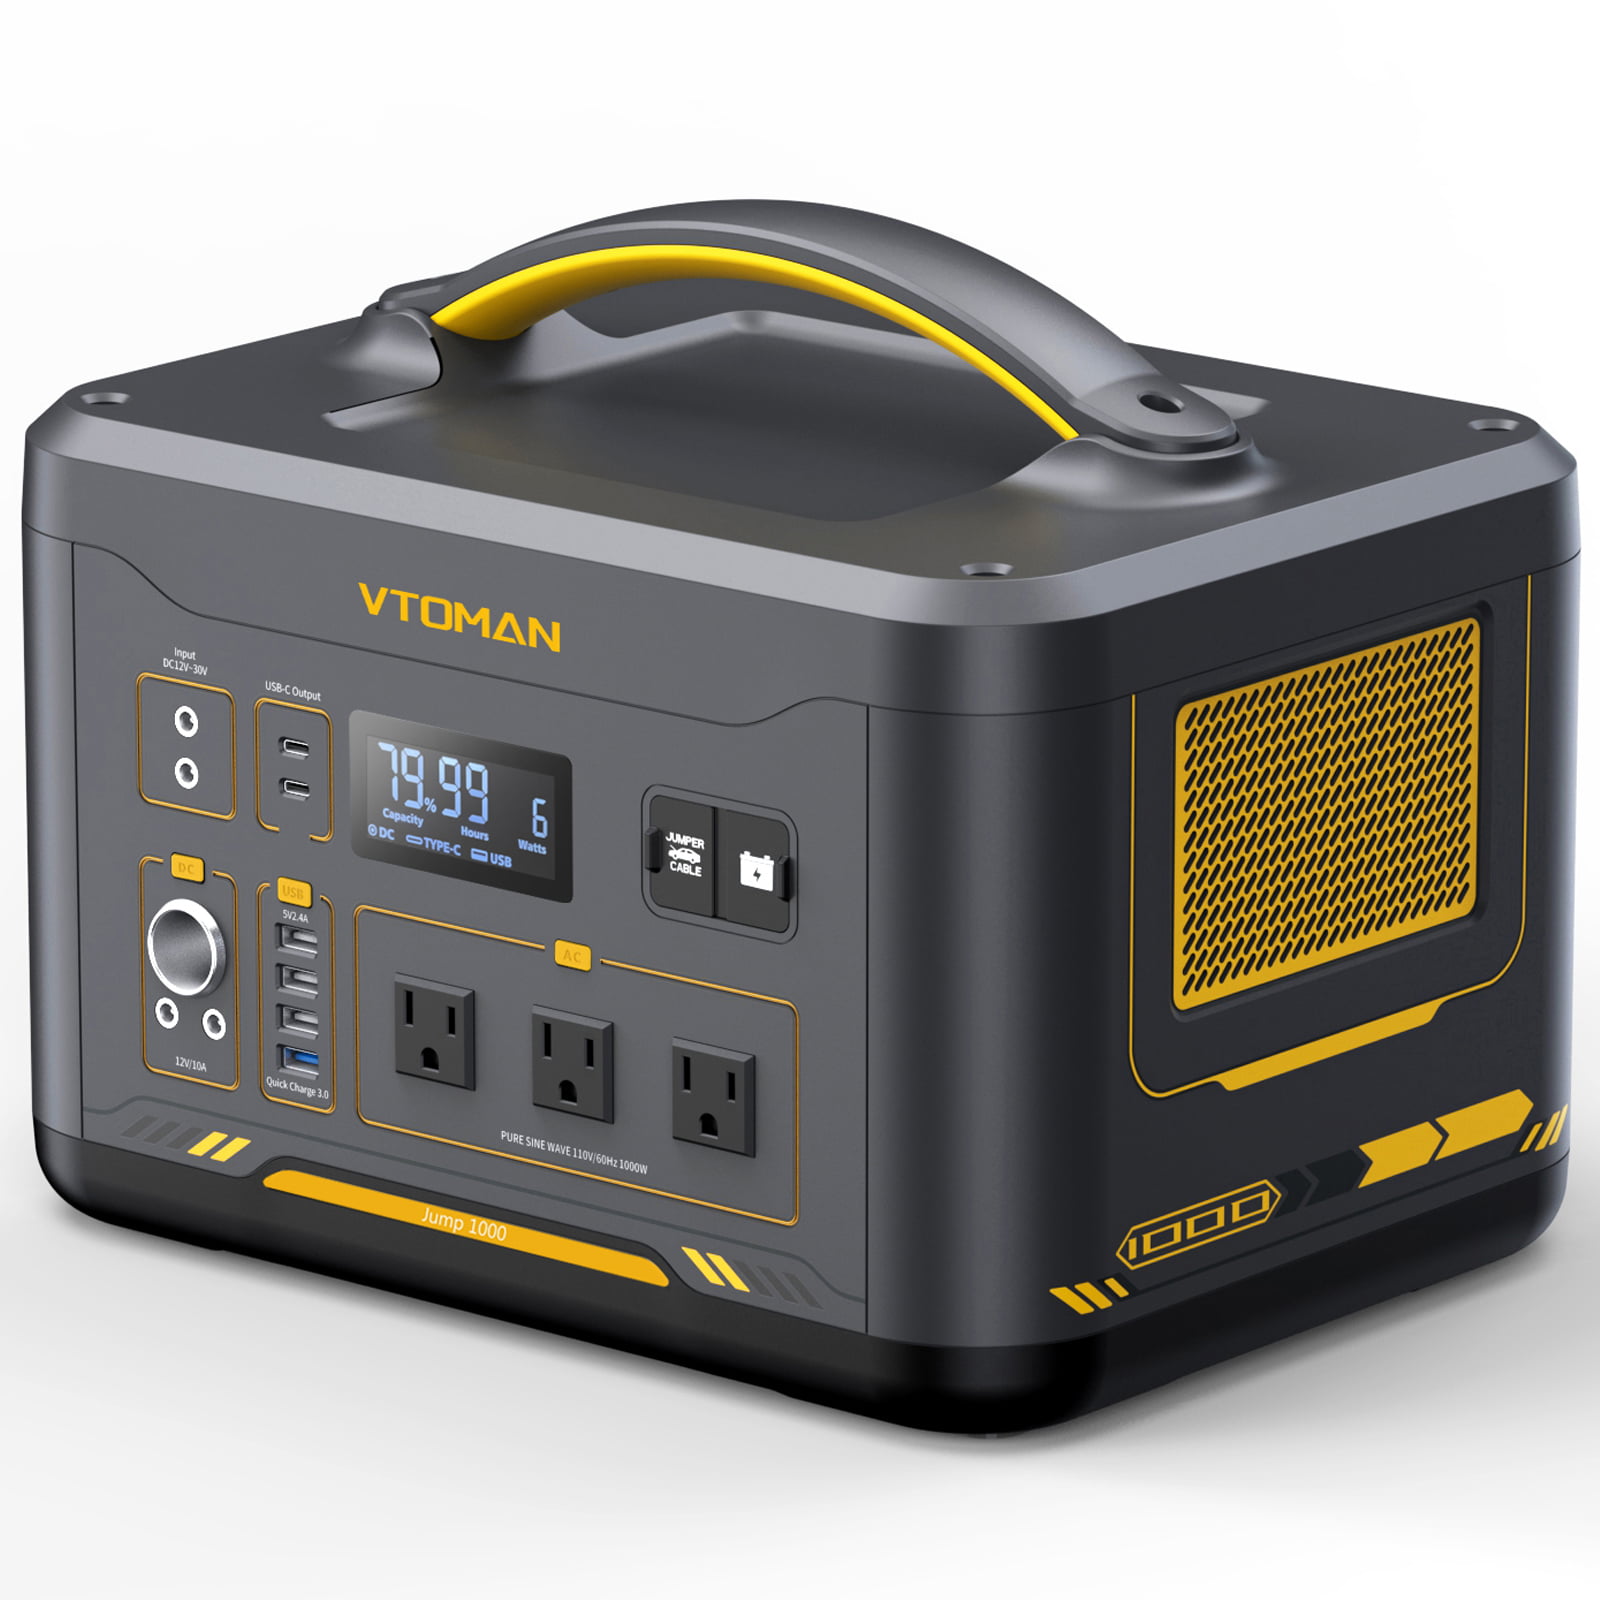 VTOMAN Jump 1000W 1408Wh Portable Power Station Solar Generator with 1000 continuous, 2000W peak AC output